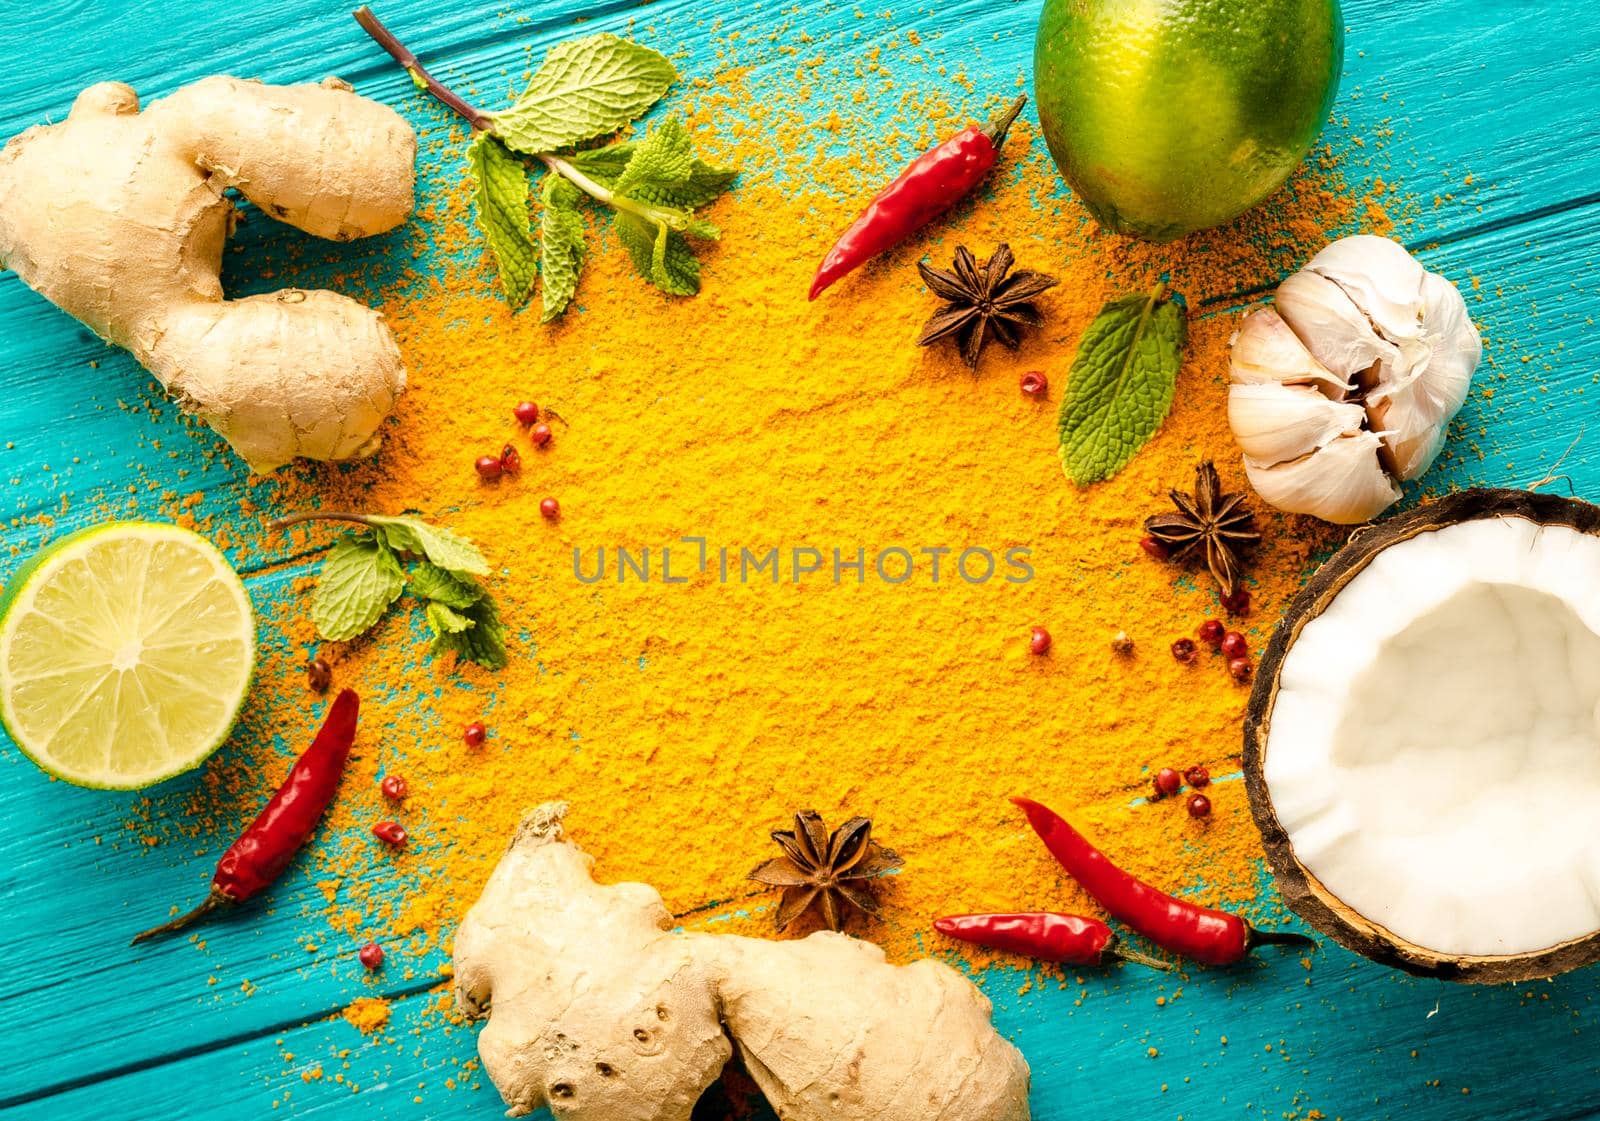 Thai food background. Ingredients for making thai food. Coconut, ginger, hot pepper, lime, curry, herbs, spices. Thai cuisine ingredients on blue wooden background. Space for text. Top view. Close-up